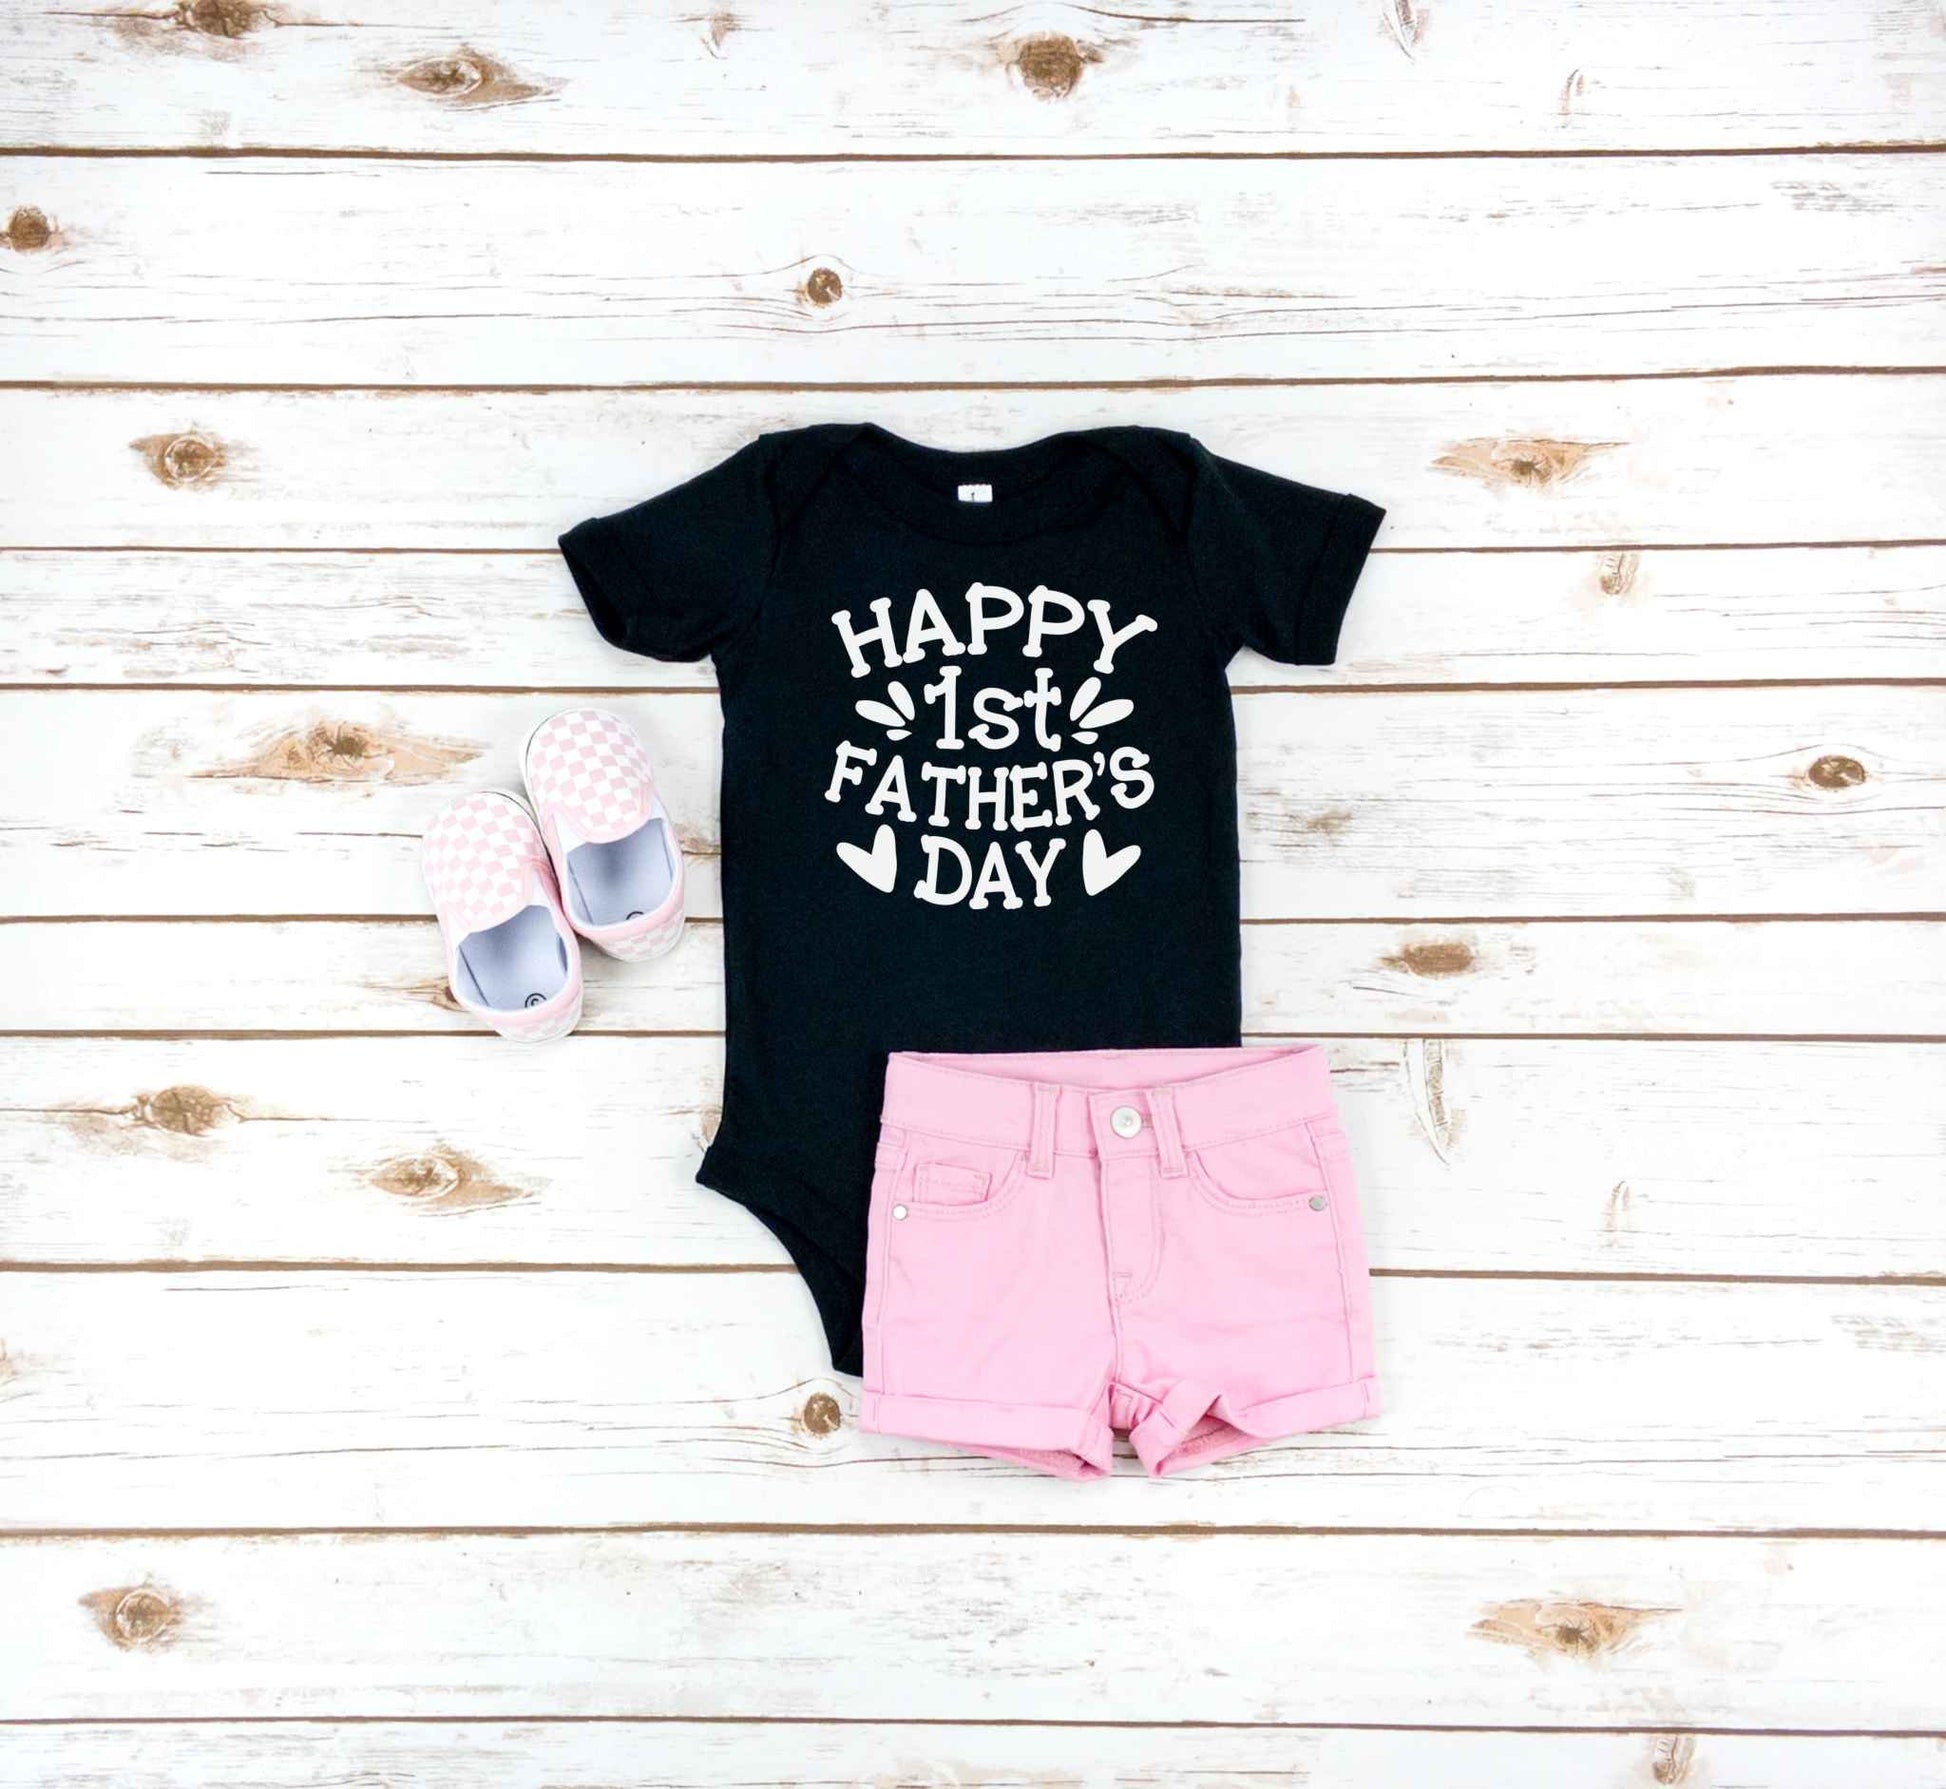 Happy 1st Father's Day Baby Bodysuit - Gift for new dad